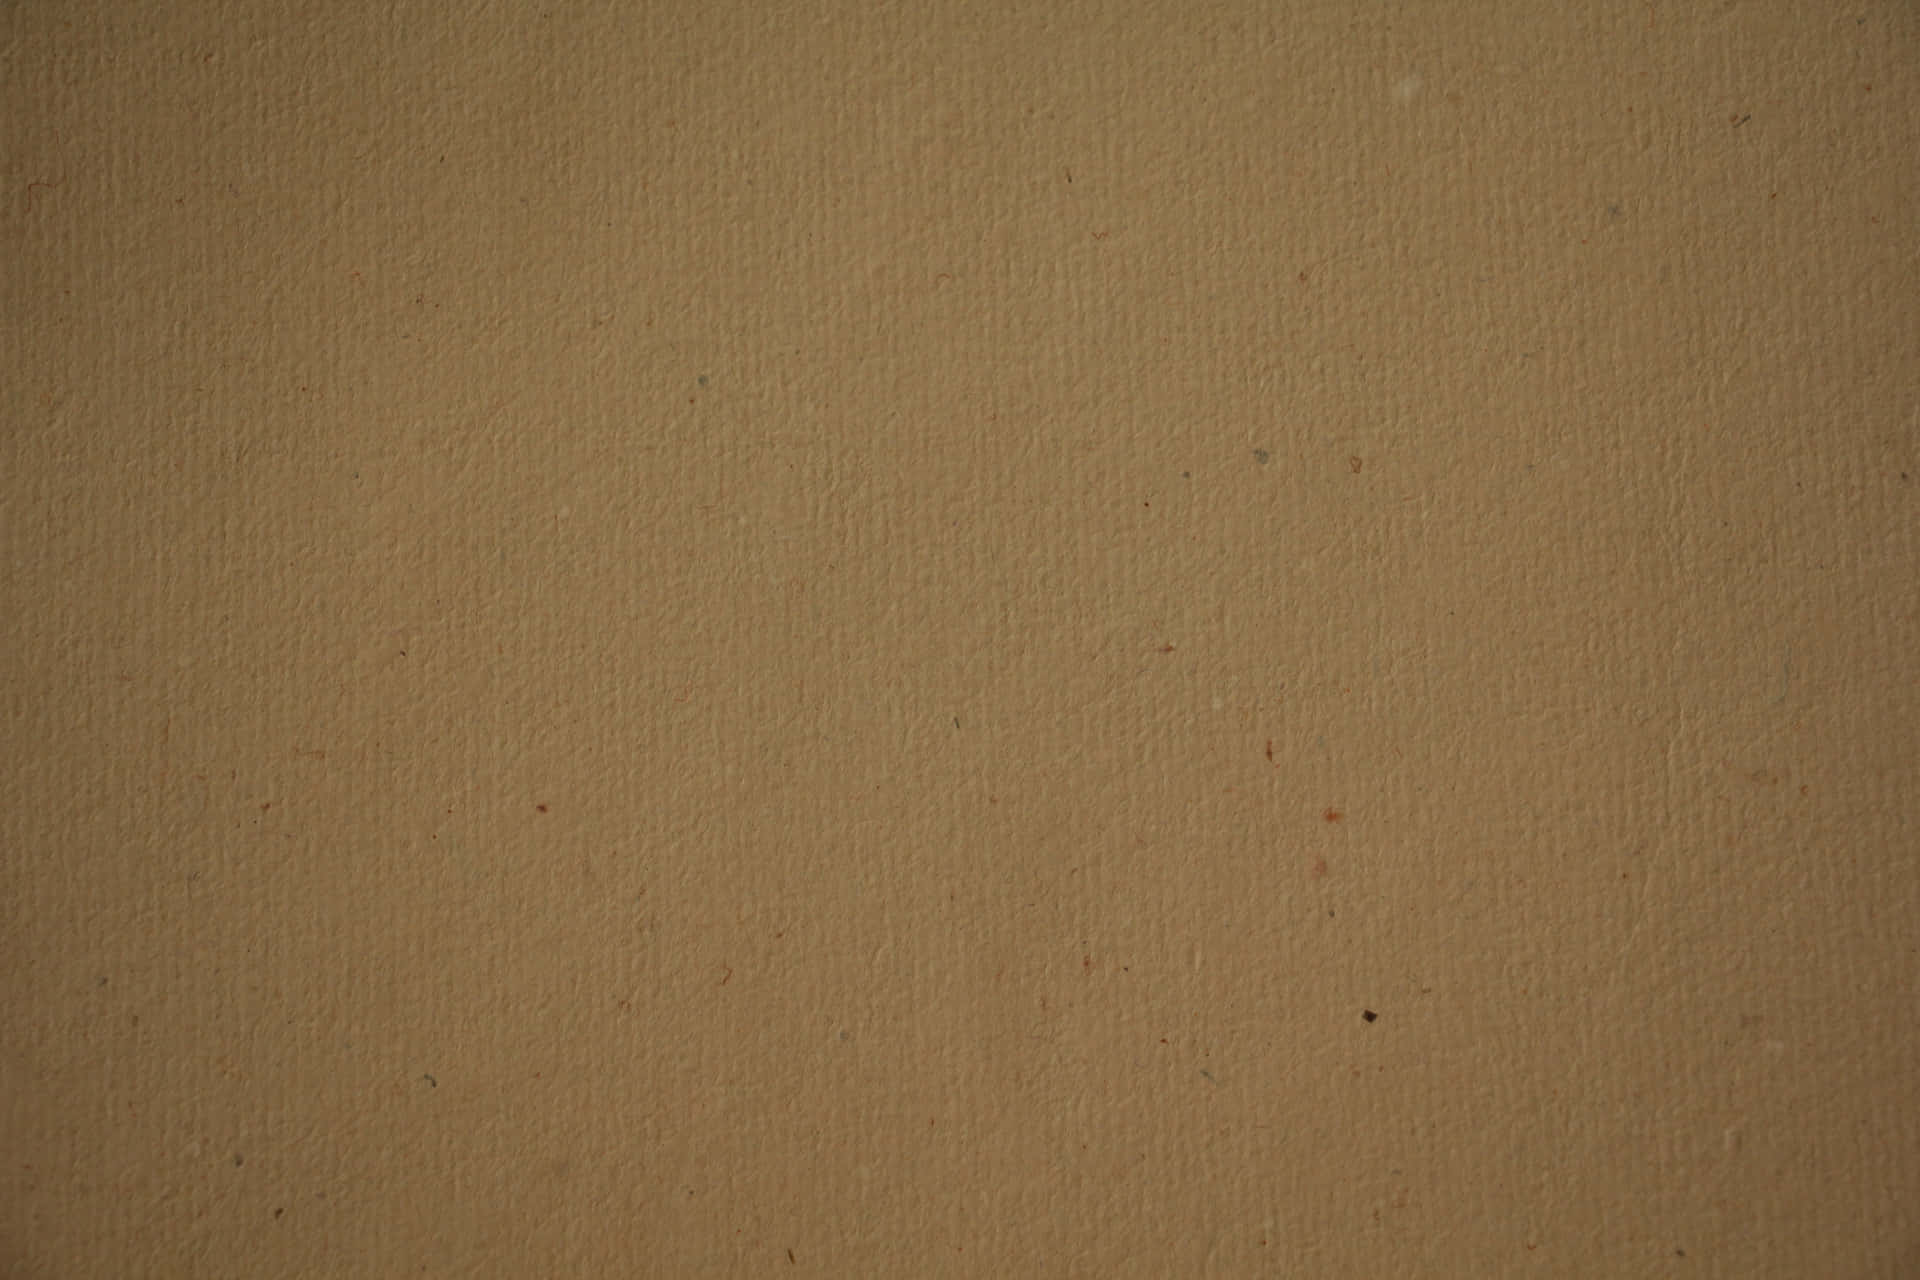 A Brown Paper Background With A Few Spots